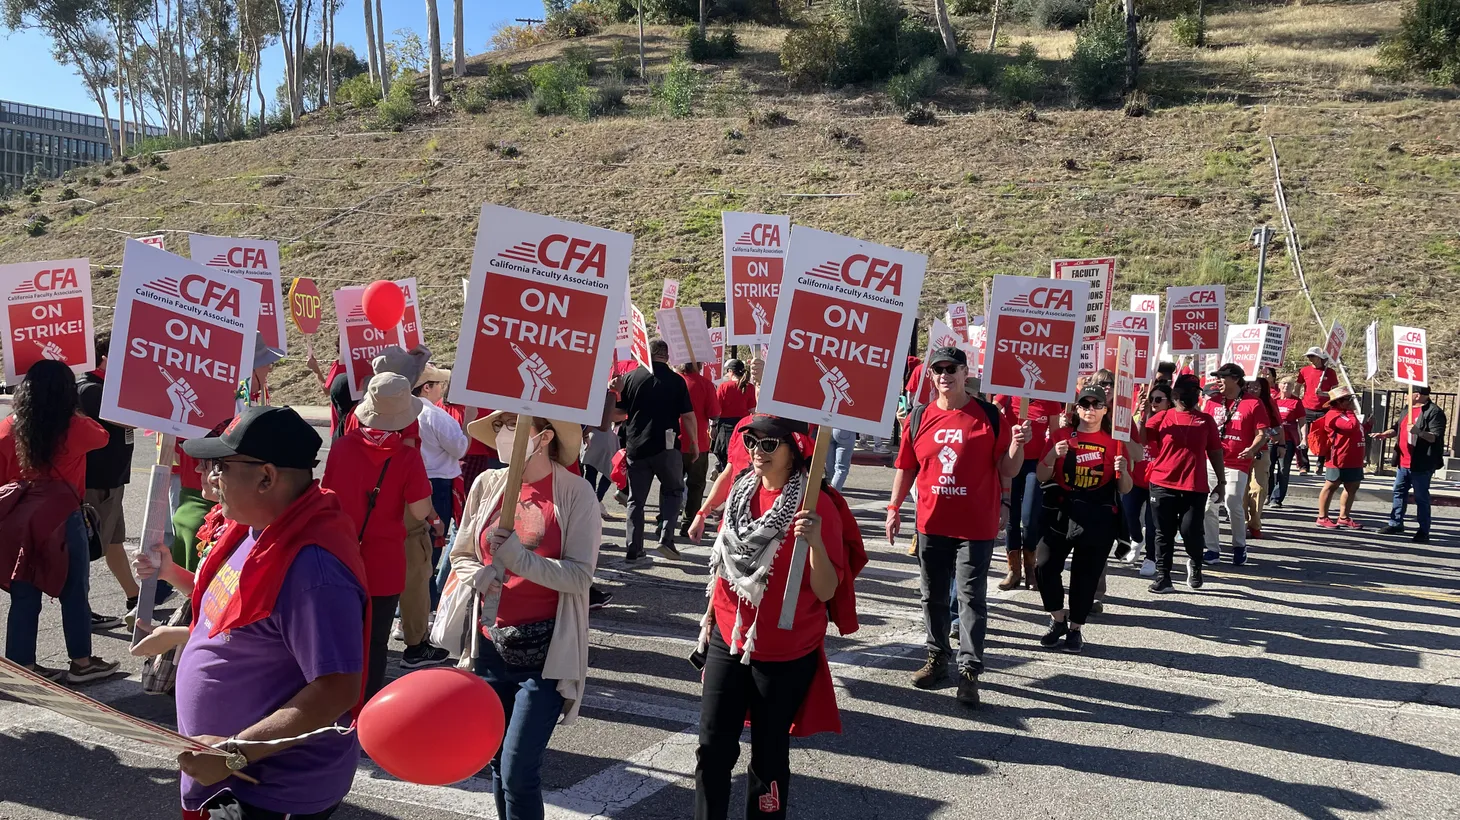 About 300 picketers marched in a one-day strike at Cal State LA to demand higher wages for faculty.